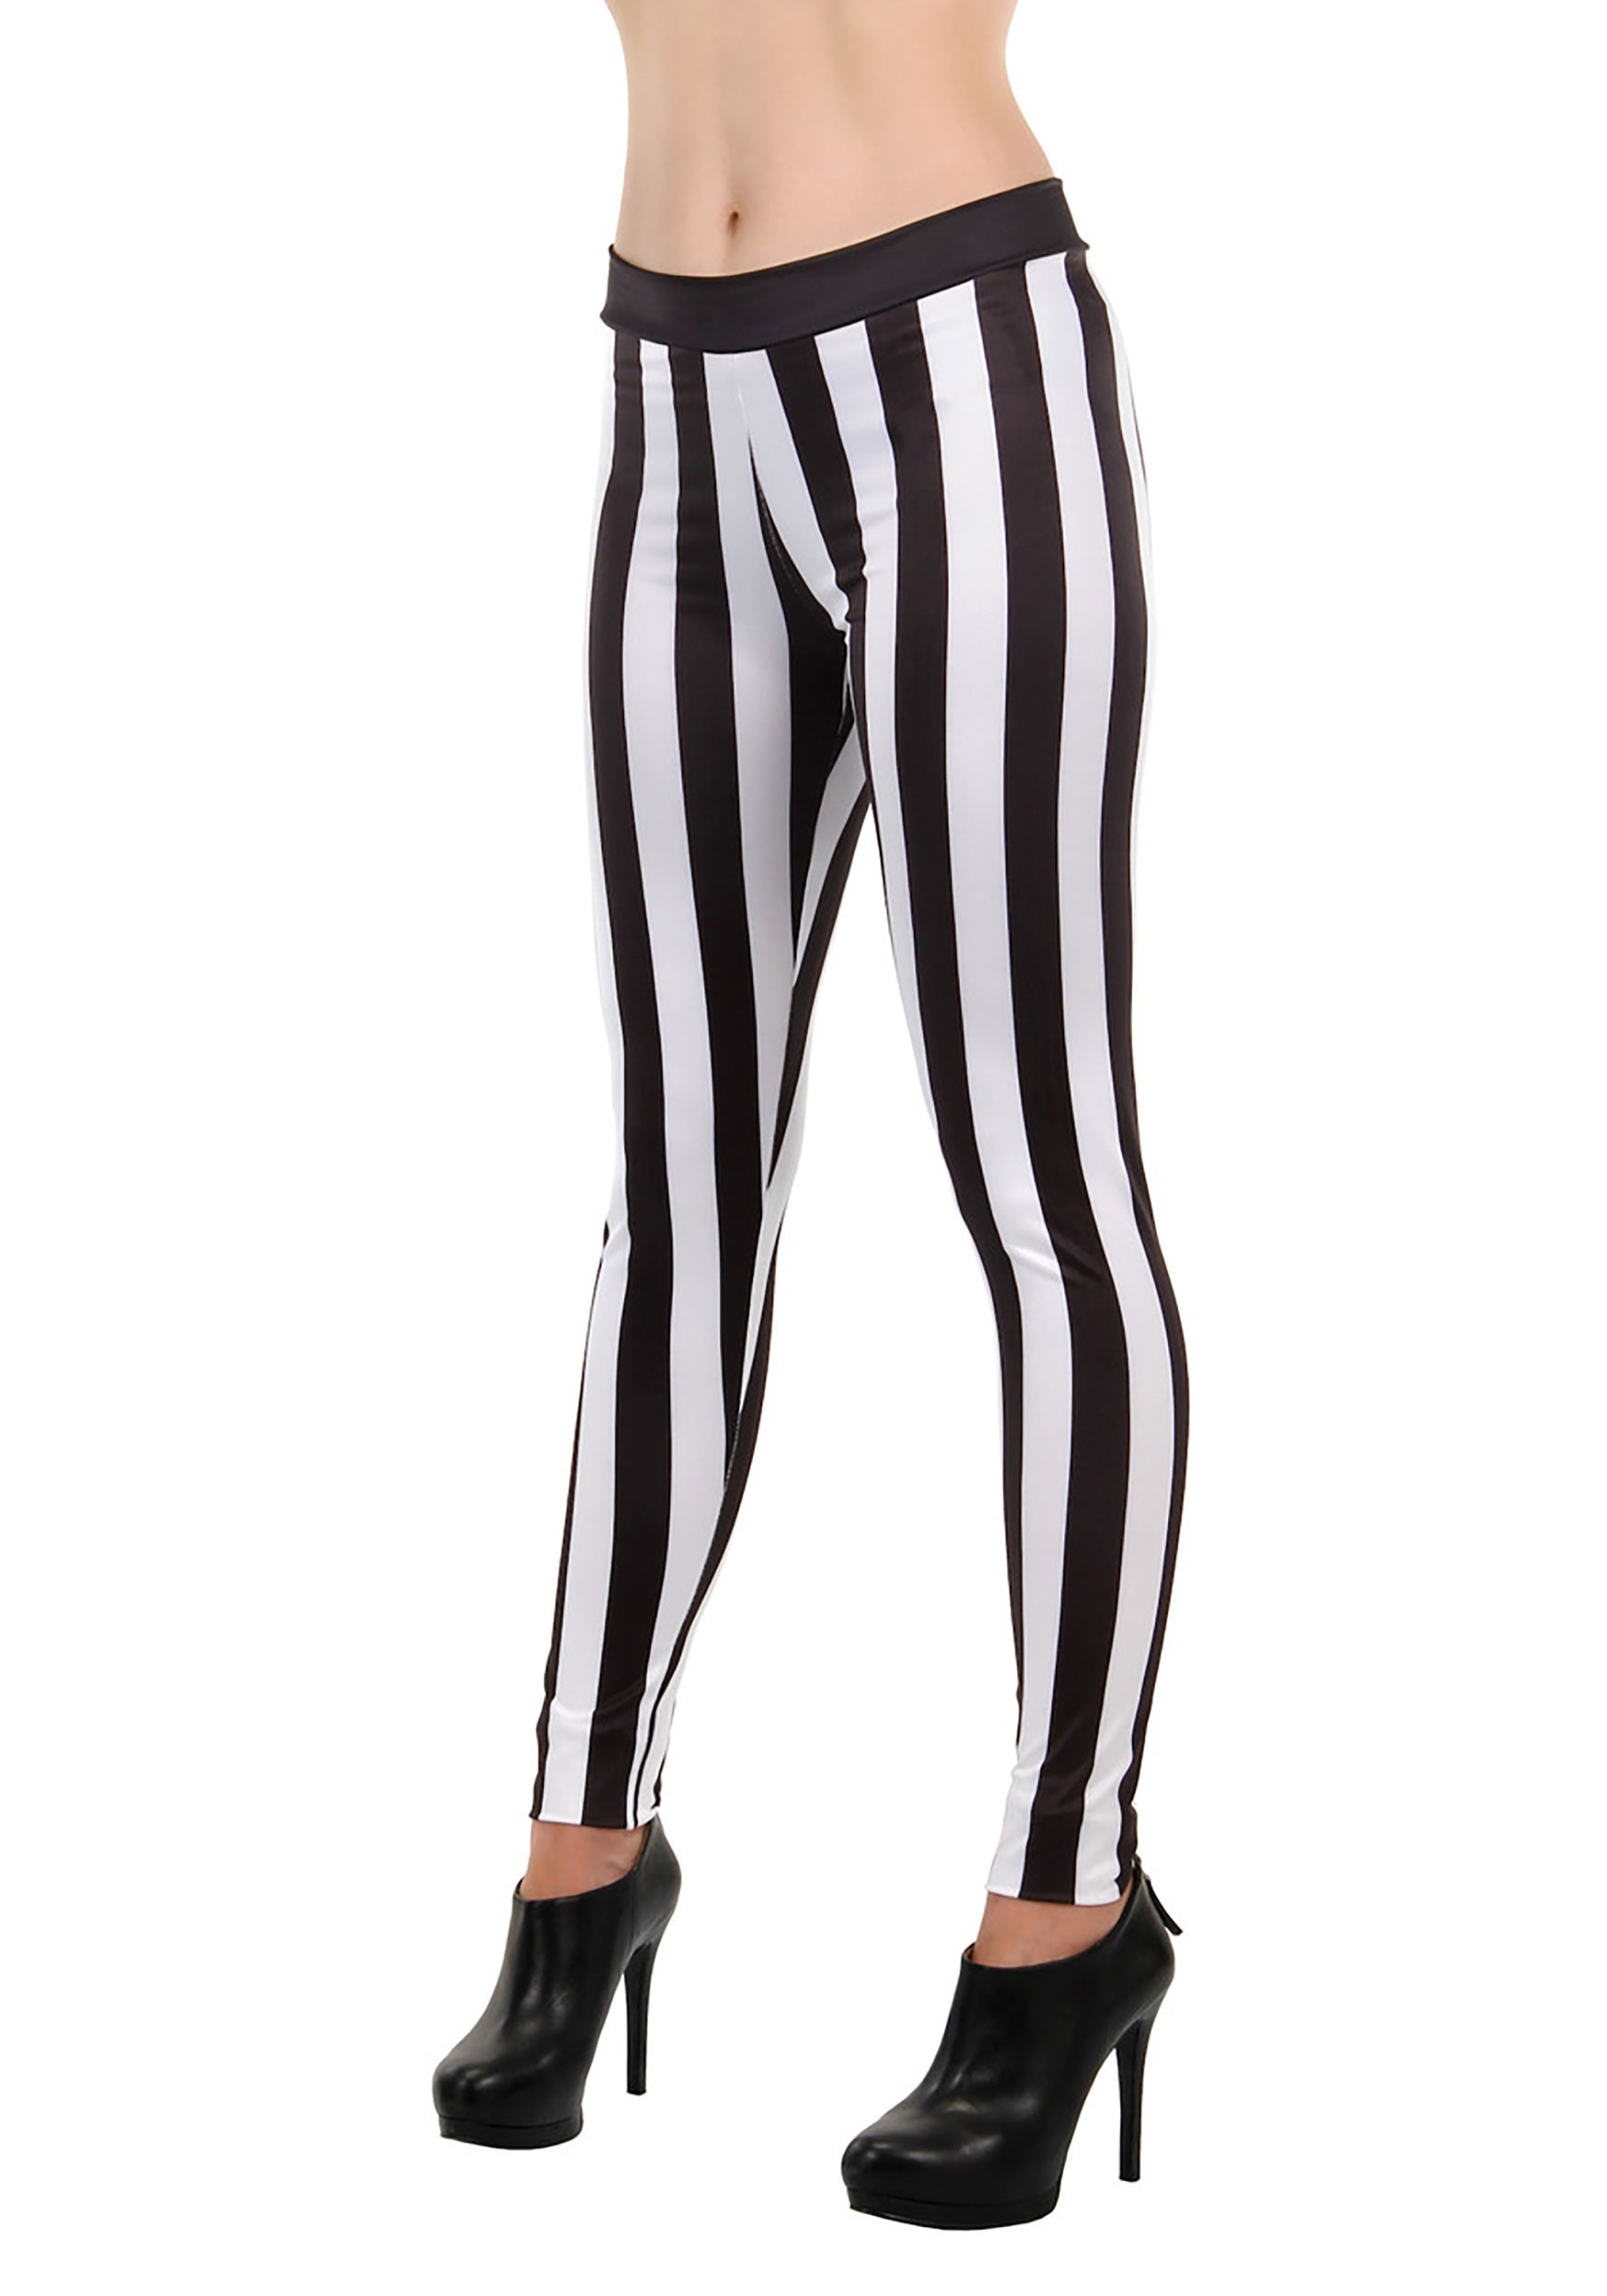 Women's Black and White Striped Beetlejuice Leggings - Mad Halloween